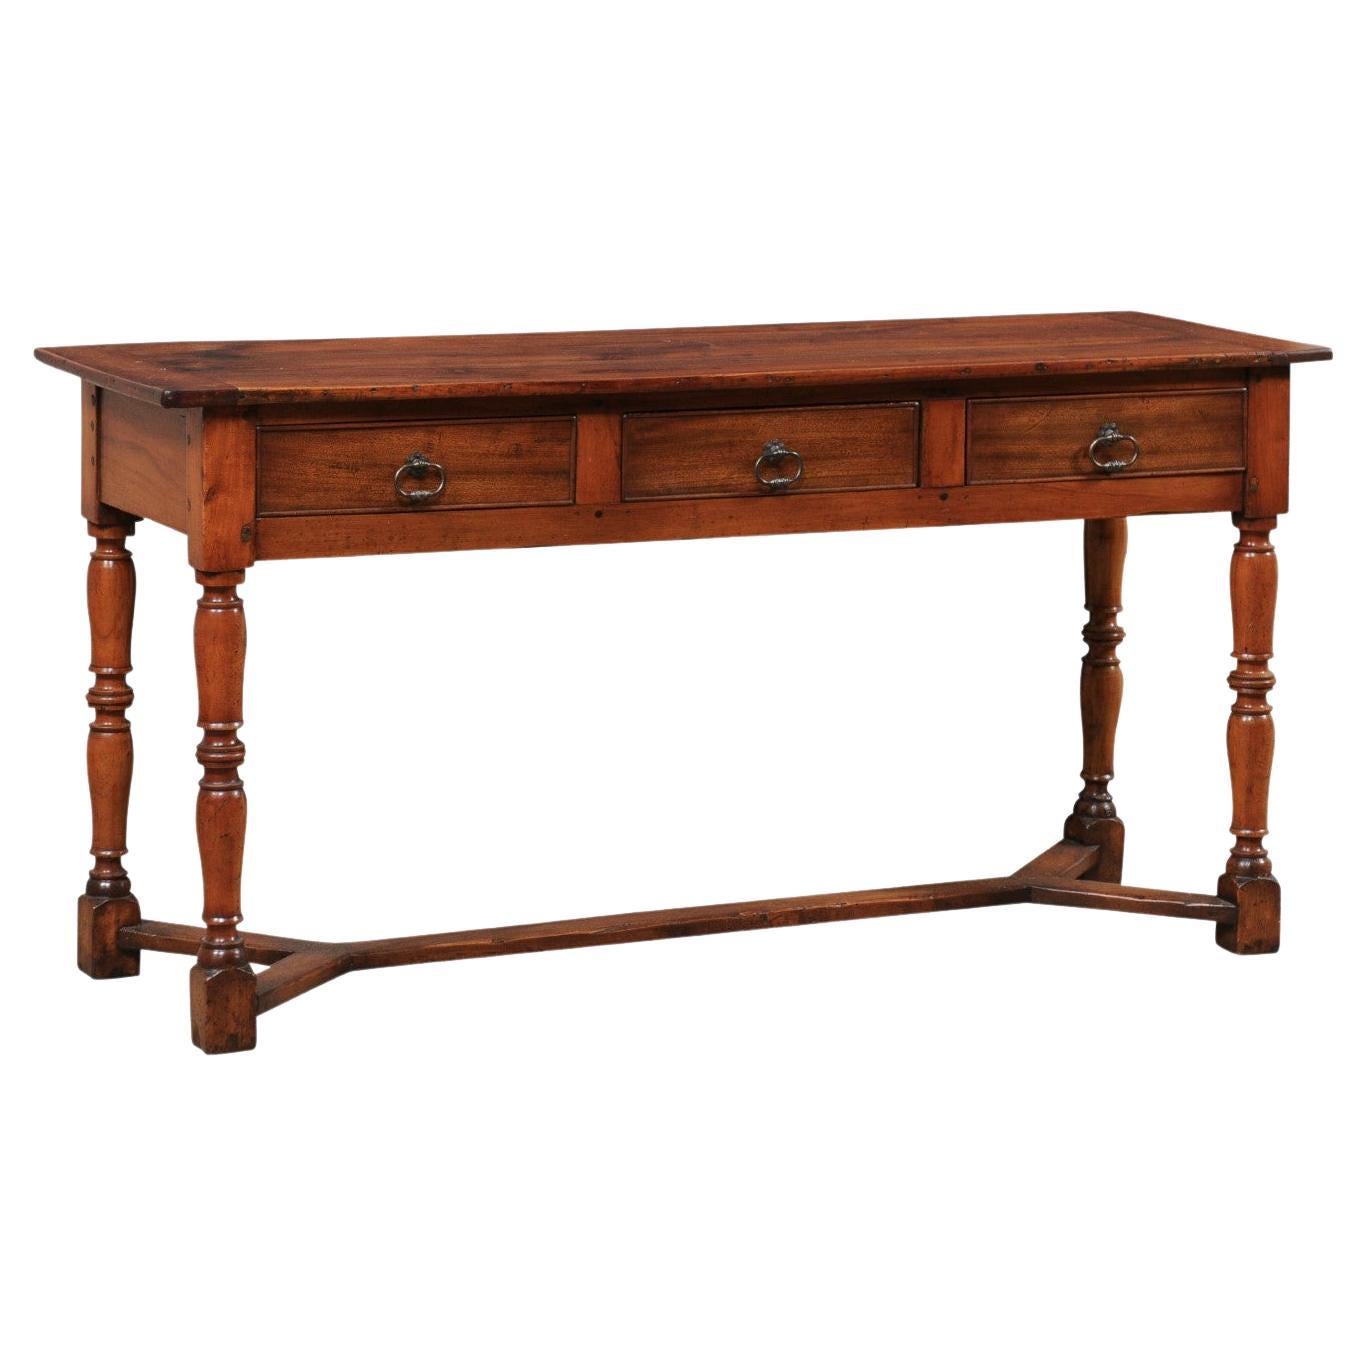 19th C. English Wooden Sofa or Console Table w/ 3 Drawers and Nicely Turned Legs